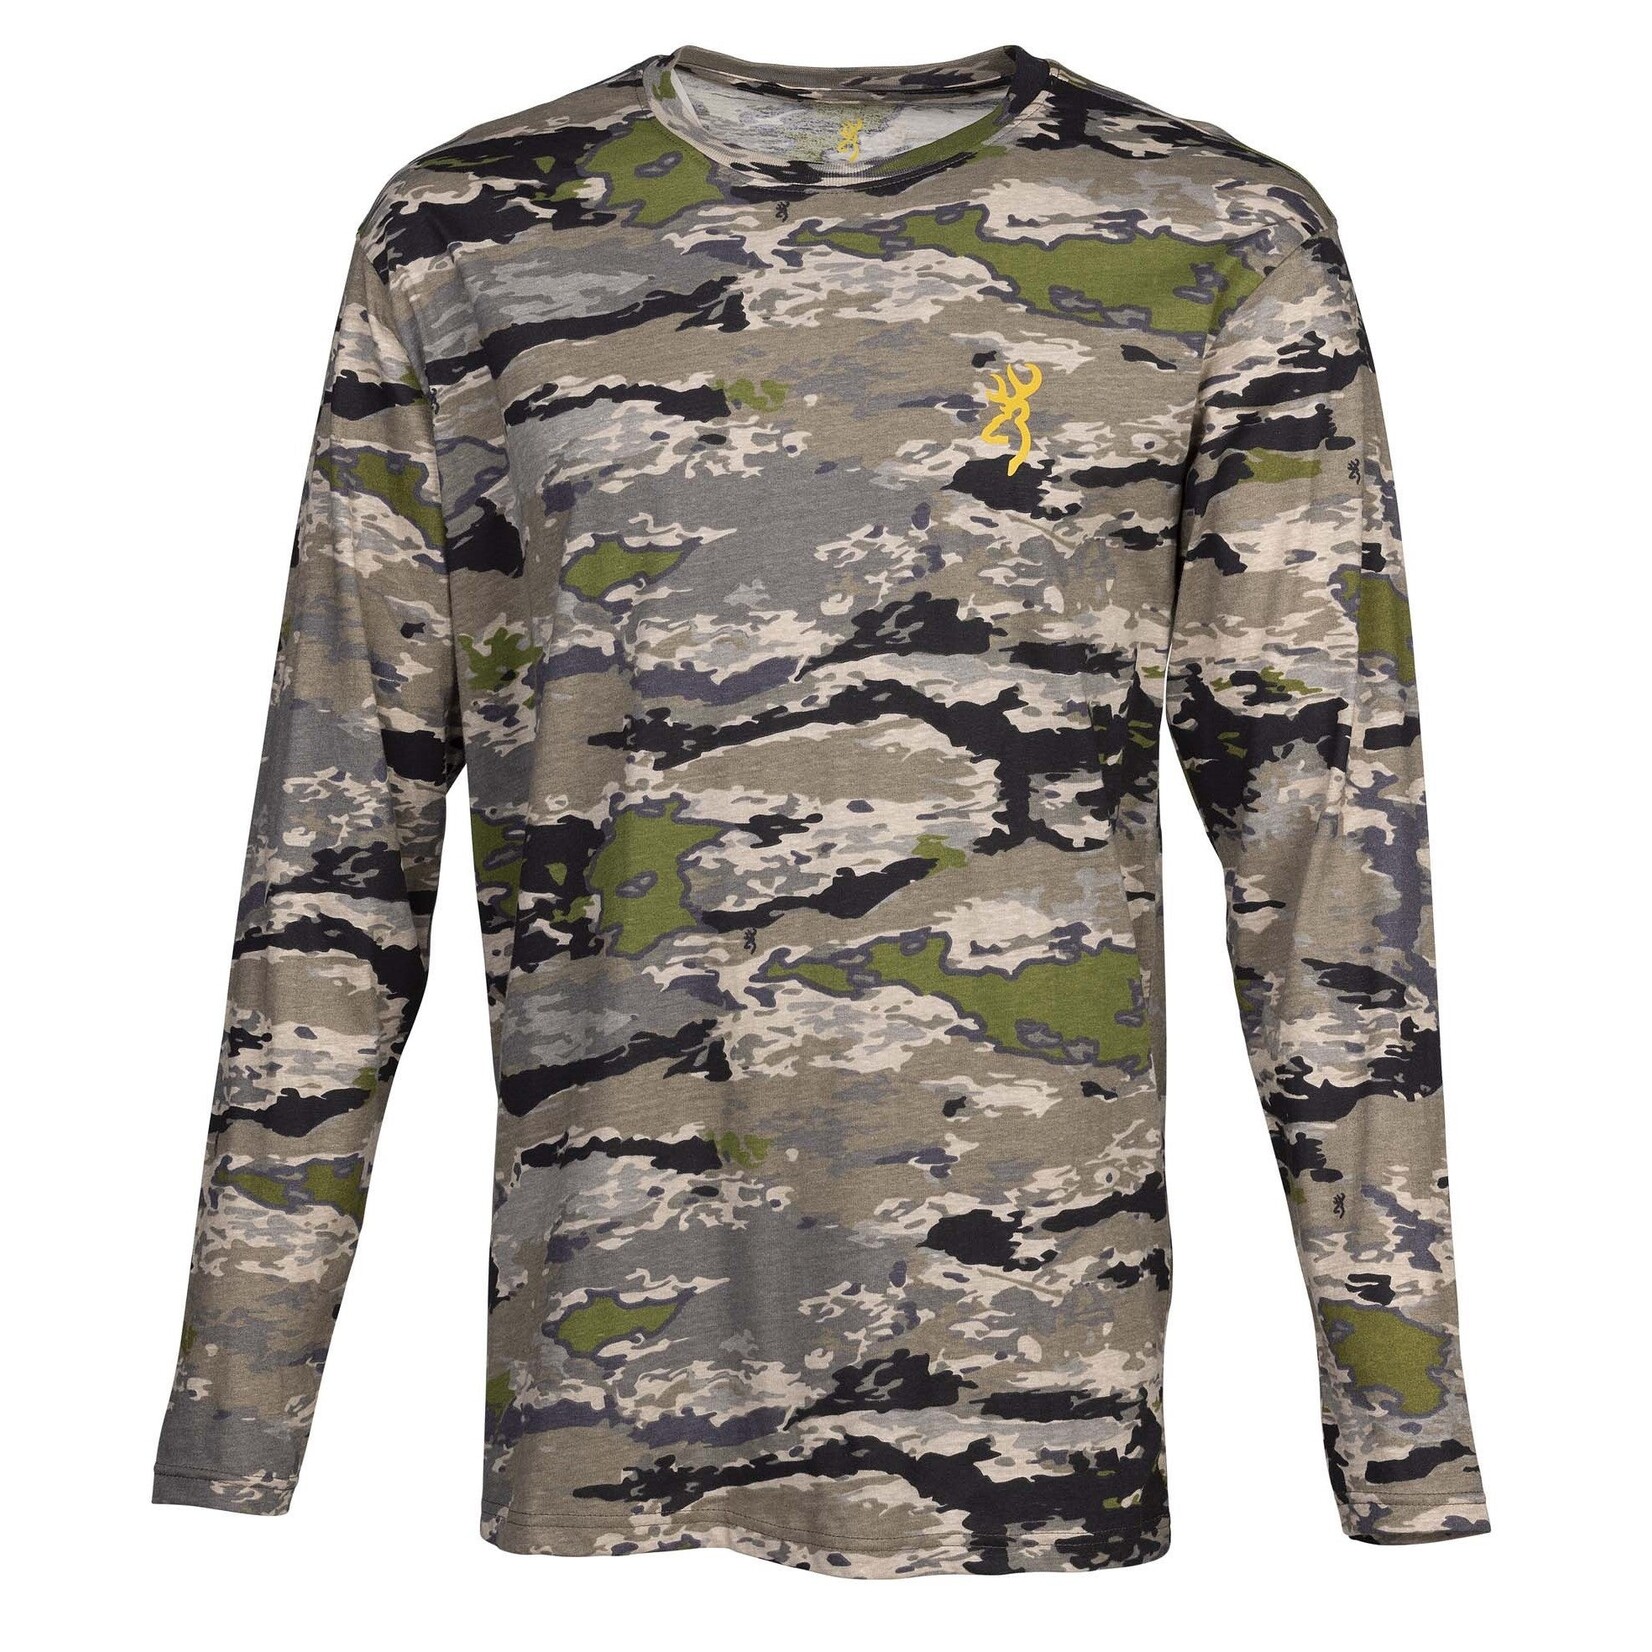 Browning Browning Wasatch Long Sleeve T-Shirt